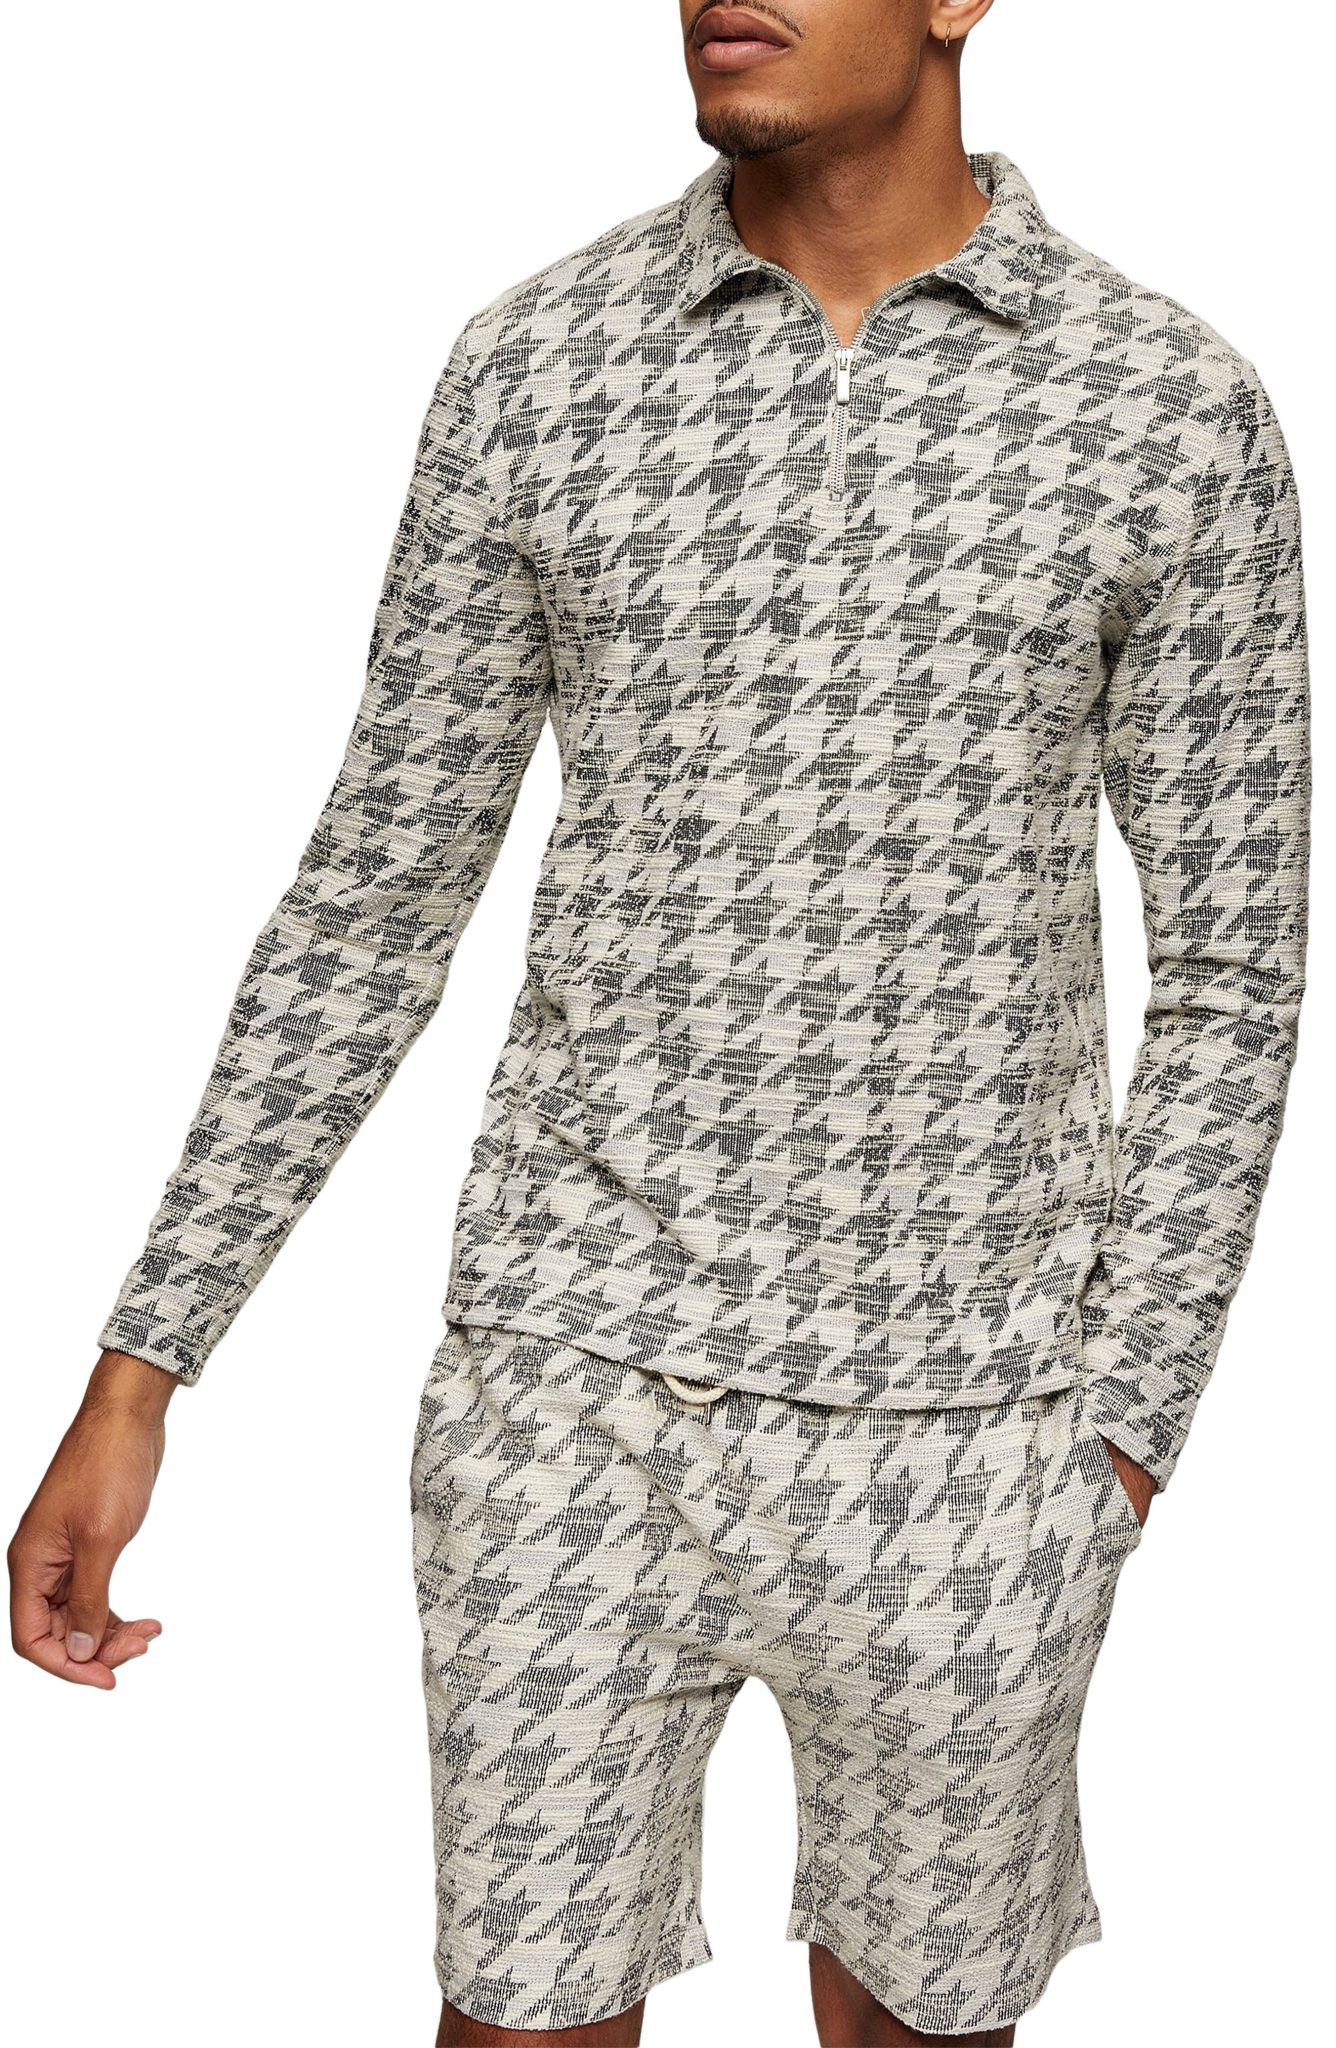 Men’s Topman Slim Fit Houndstooth Shirt, Size Large - White | The ...